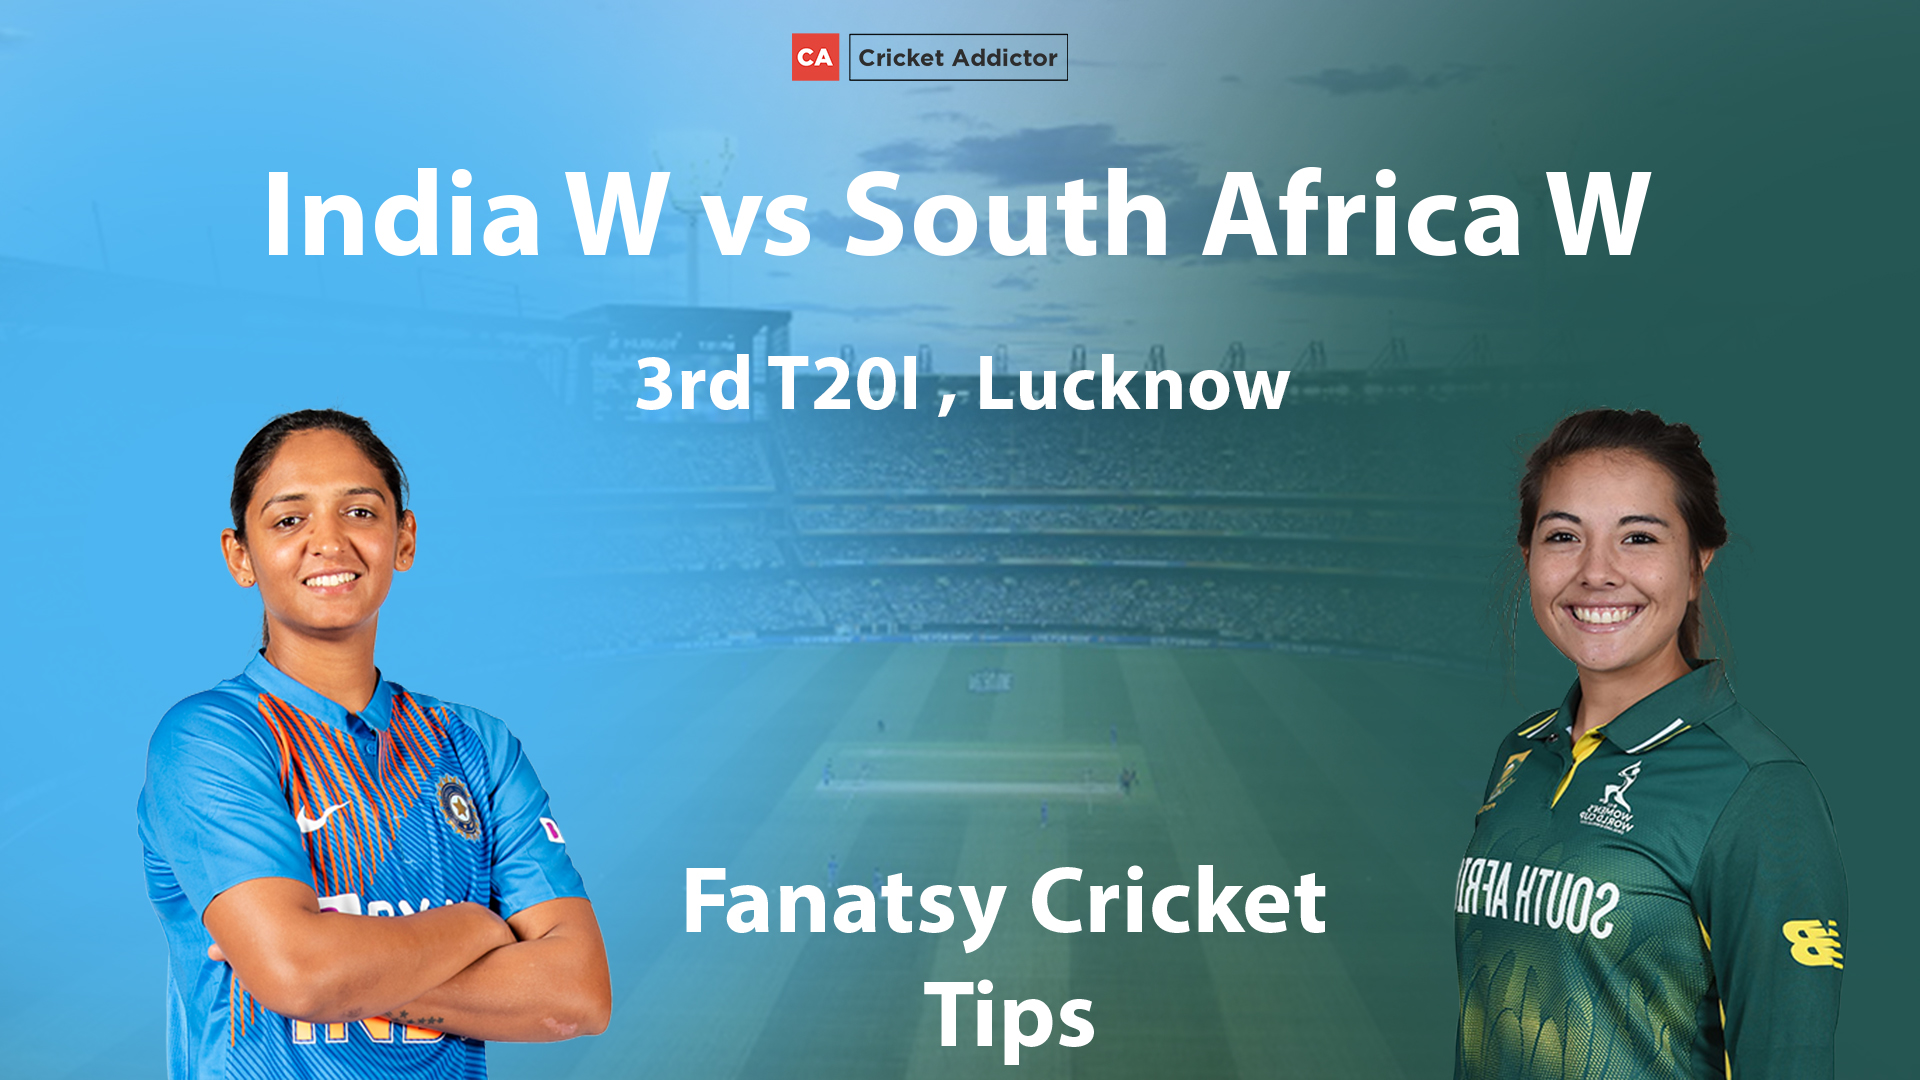 India Women vs South Africa Women 3rd T20I Dream11 Prediction, Fantasy Cricket Tips, Playing XI, Pitch Report, Dream11 Team, and Injury Update.